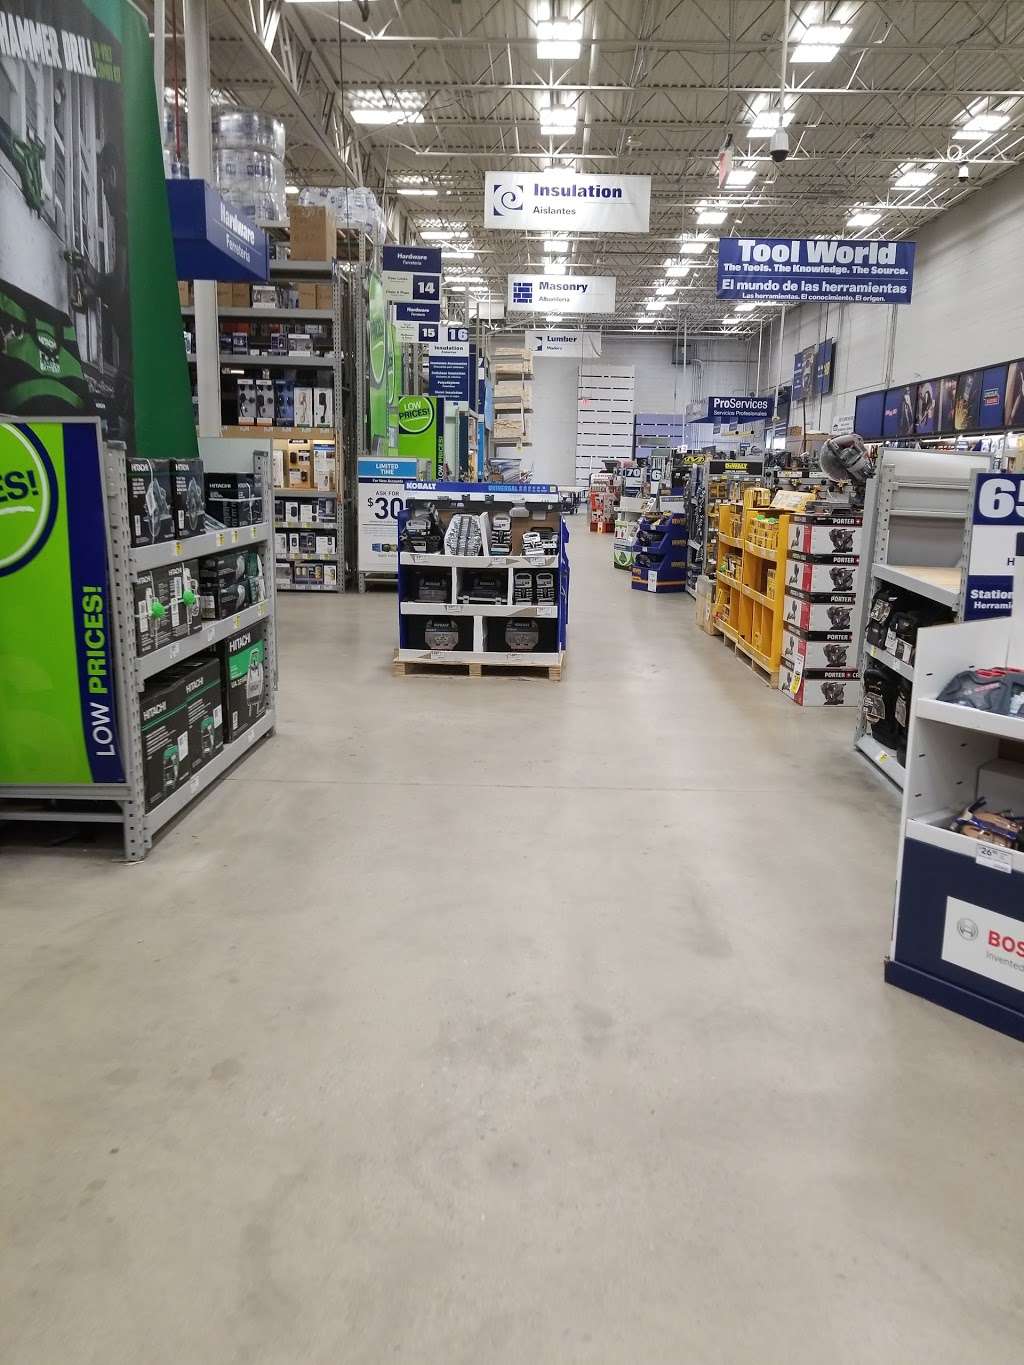 Lowes Home Improvement | 860 N Kinzie Ave, Bradley, IL 60915 | Phone: (815) 933-5555